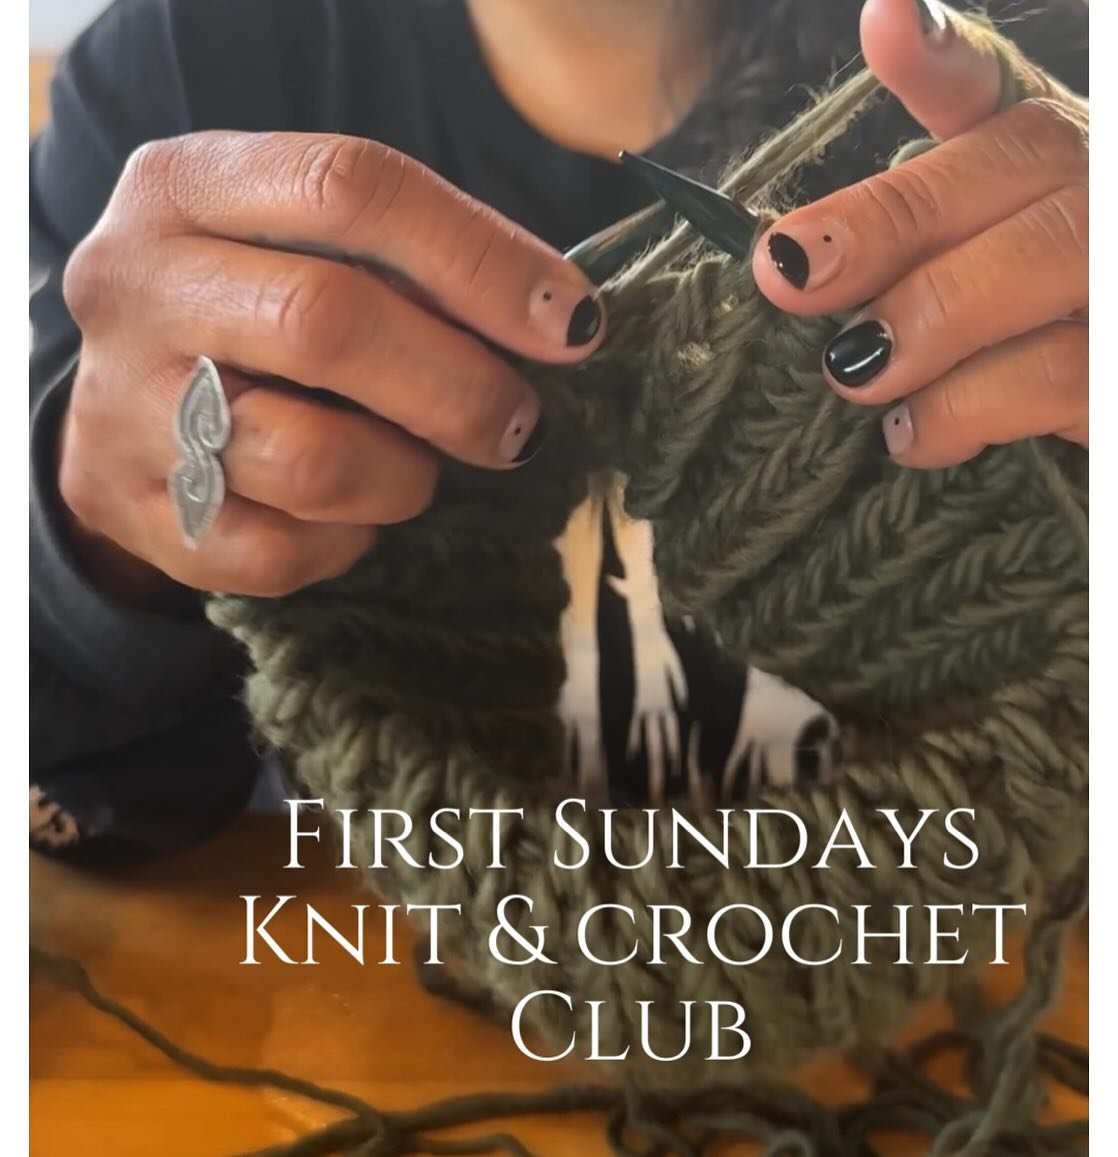 First Sundays! Knit &amp; Crochet Club will be held every first Sunday of the month! Mark your calendars. 
🧶May 5th 11:30am-2:30pm

🧶Bring your projects, bring your crafter friends and make some new ones!

🧶Knitting, crochet, hand loom weaving, em